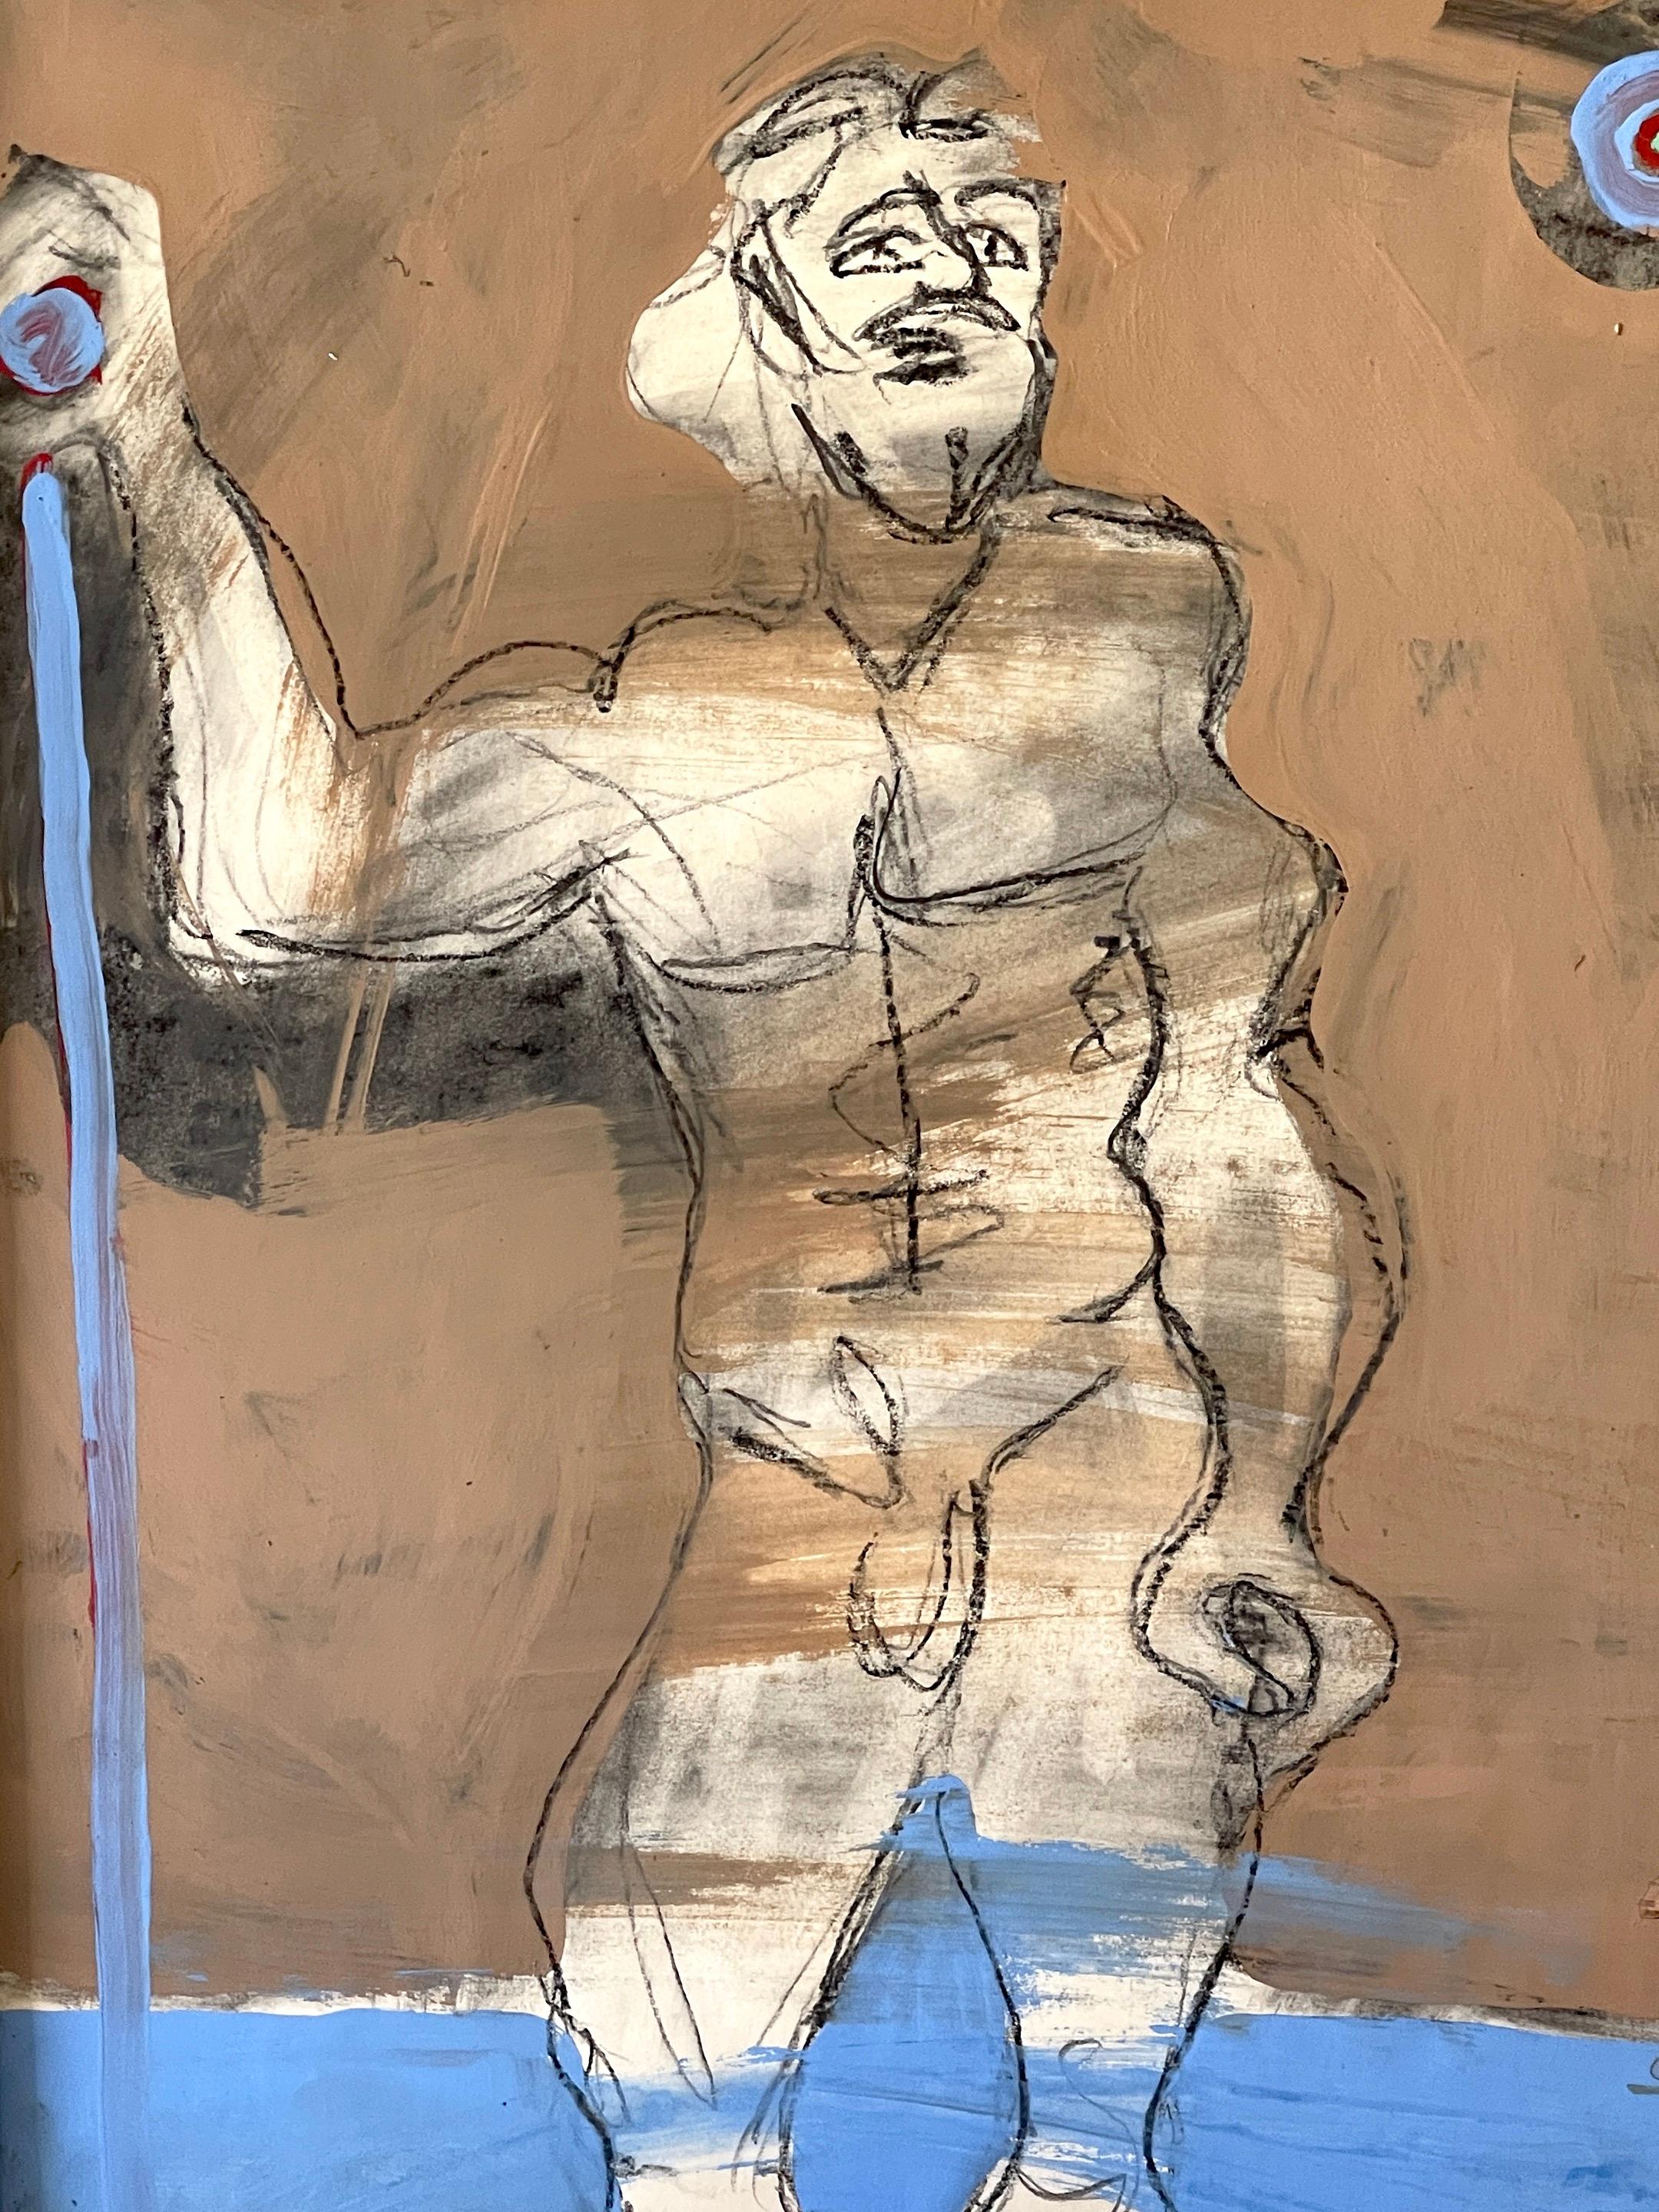 'David' Oil/Mixed Media on Paper, 1960s by Douglas D. Peden For Sale 1